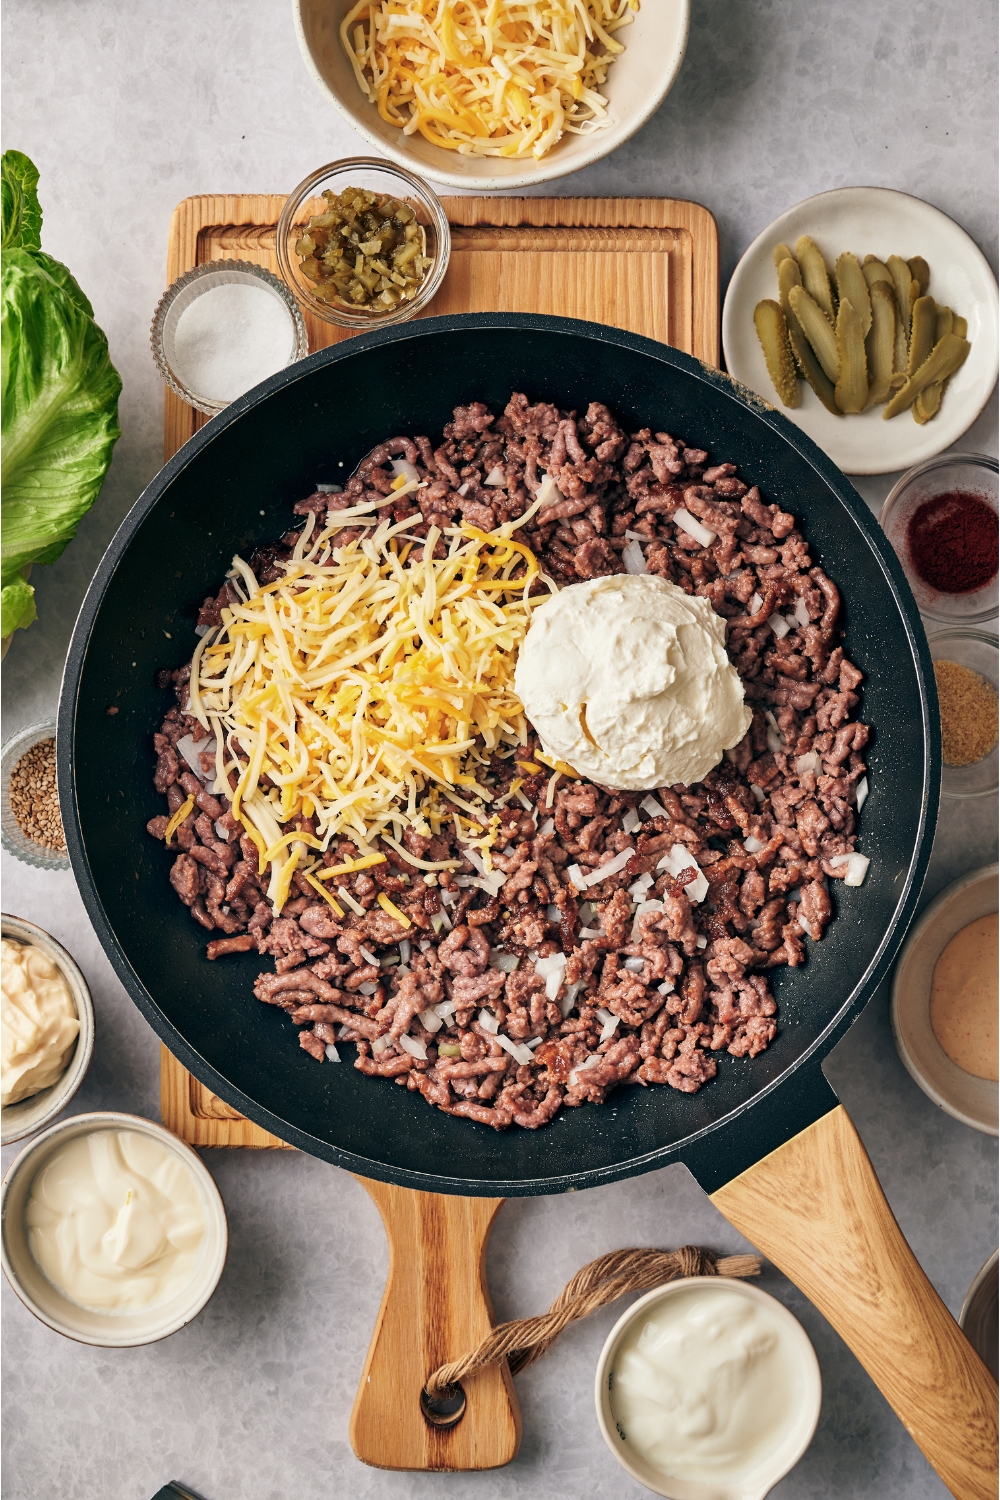 Skillet filled with cooked ground beef, diced onion, a scoop of cream cheese, and a pile of shredded cheese.